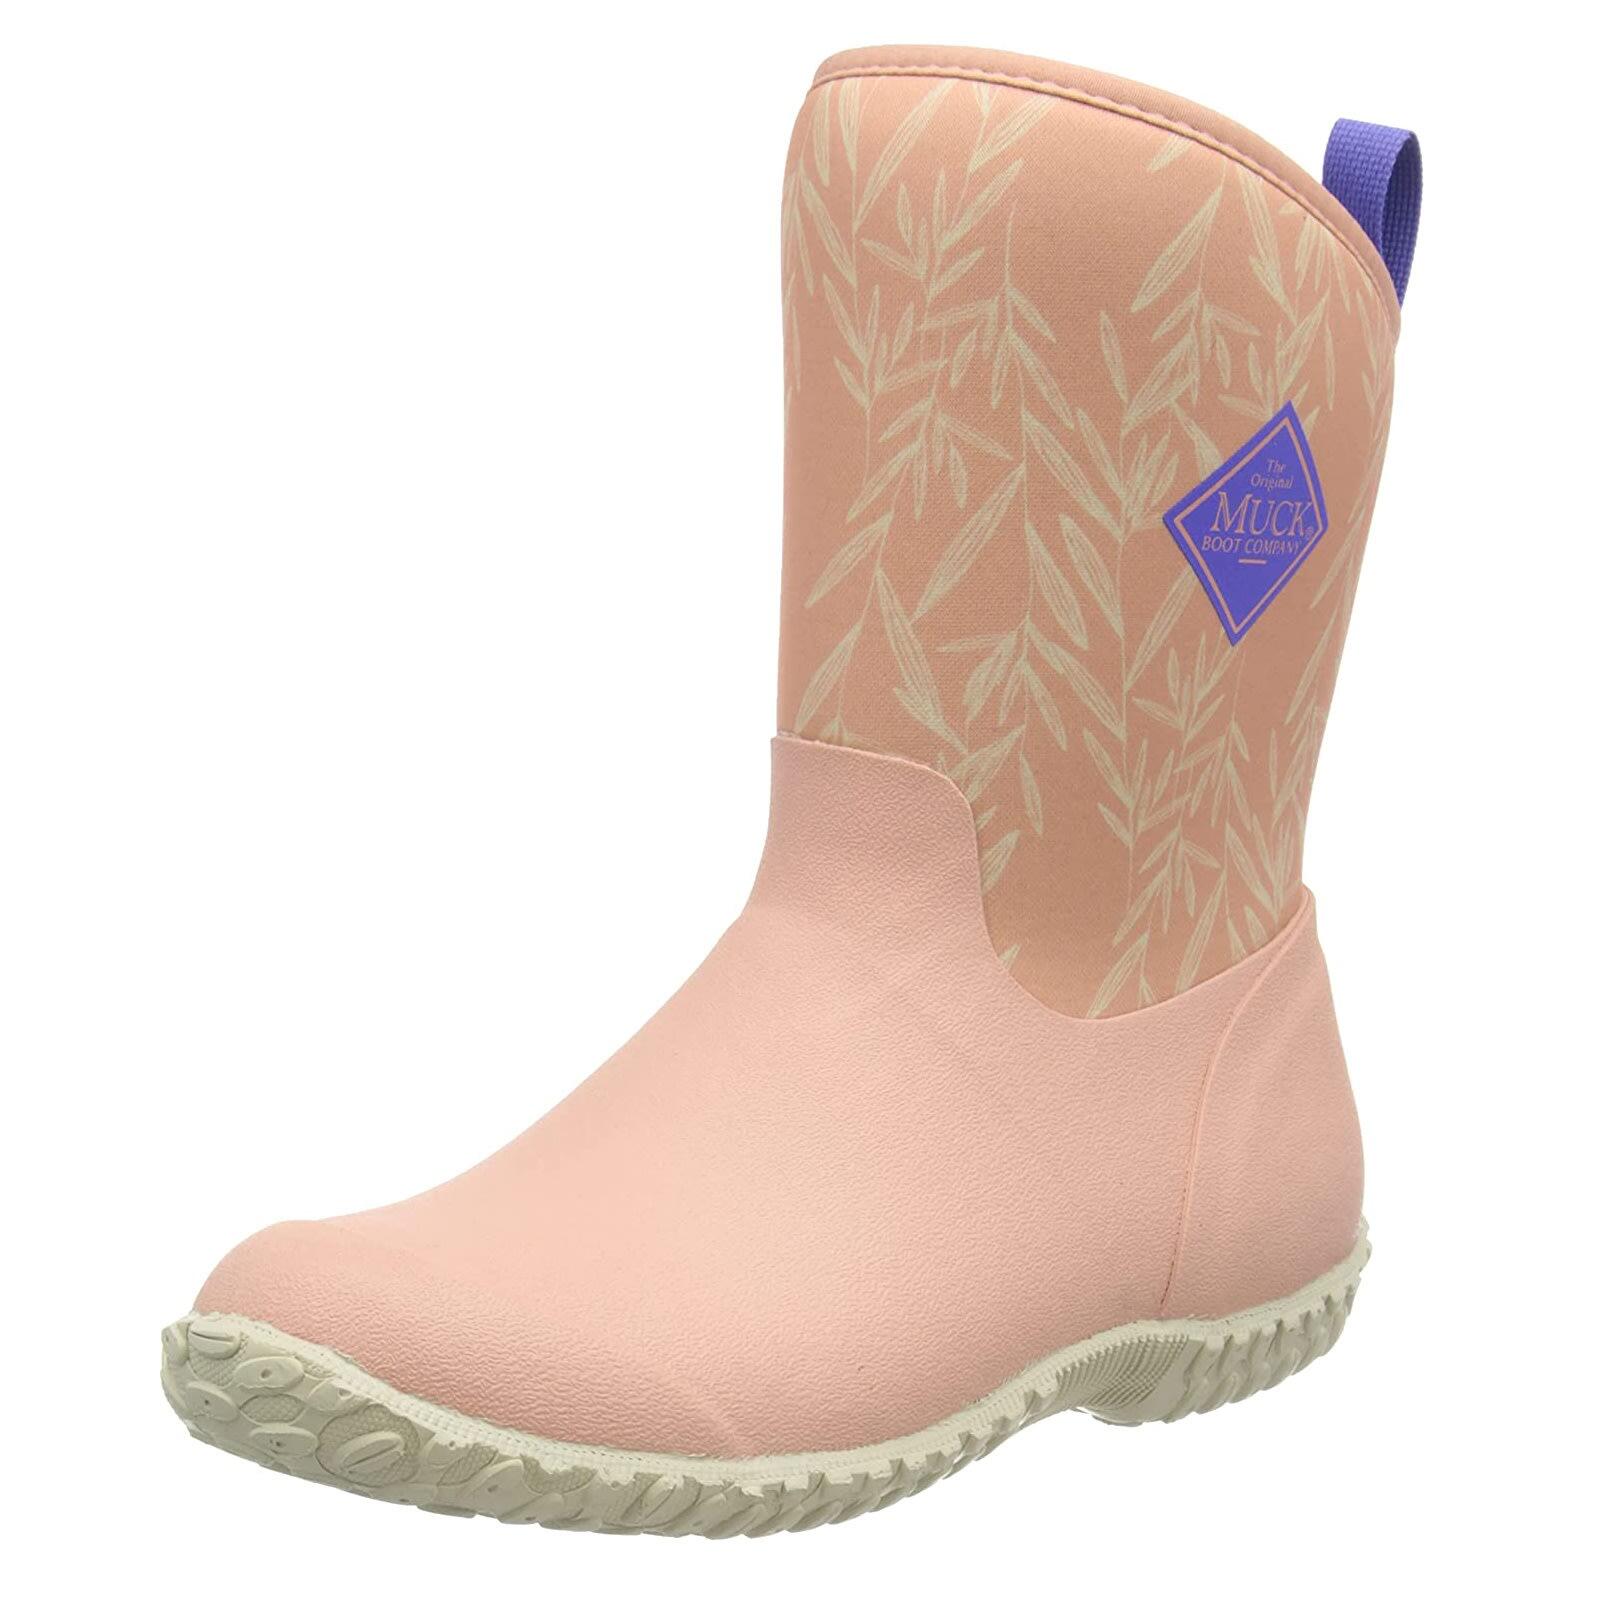 MUCK BOOTS Womens/Ladies Muckster II Wheat Short Wellington Boots (Muted Clay)